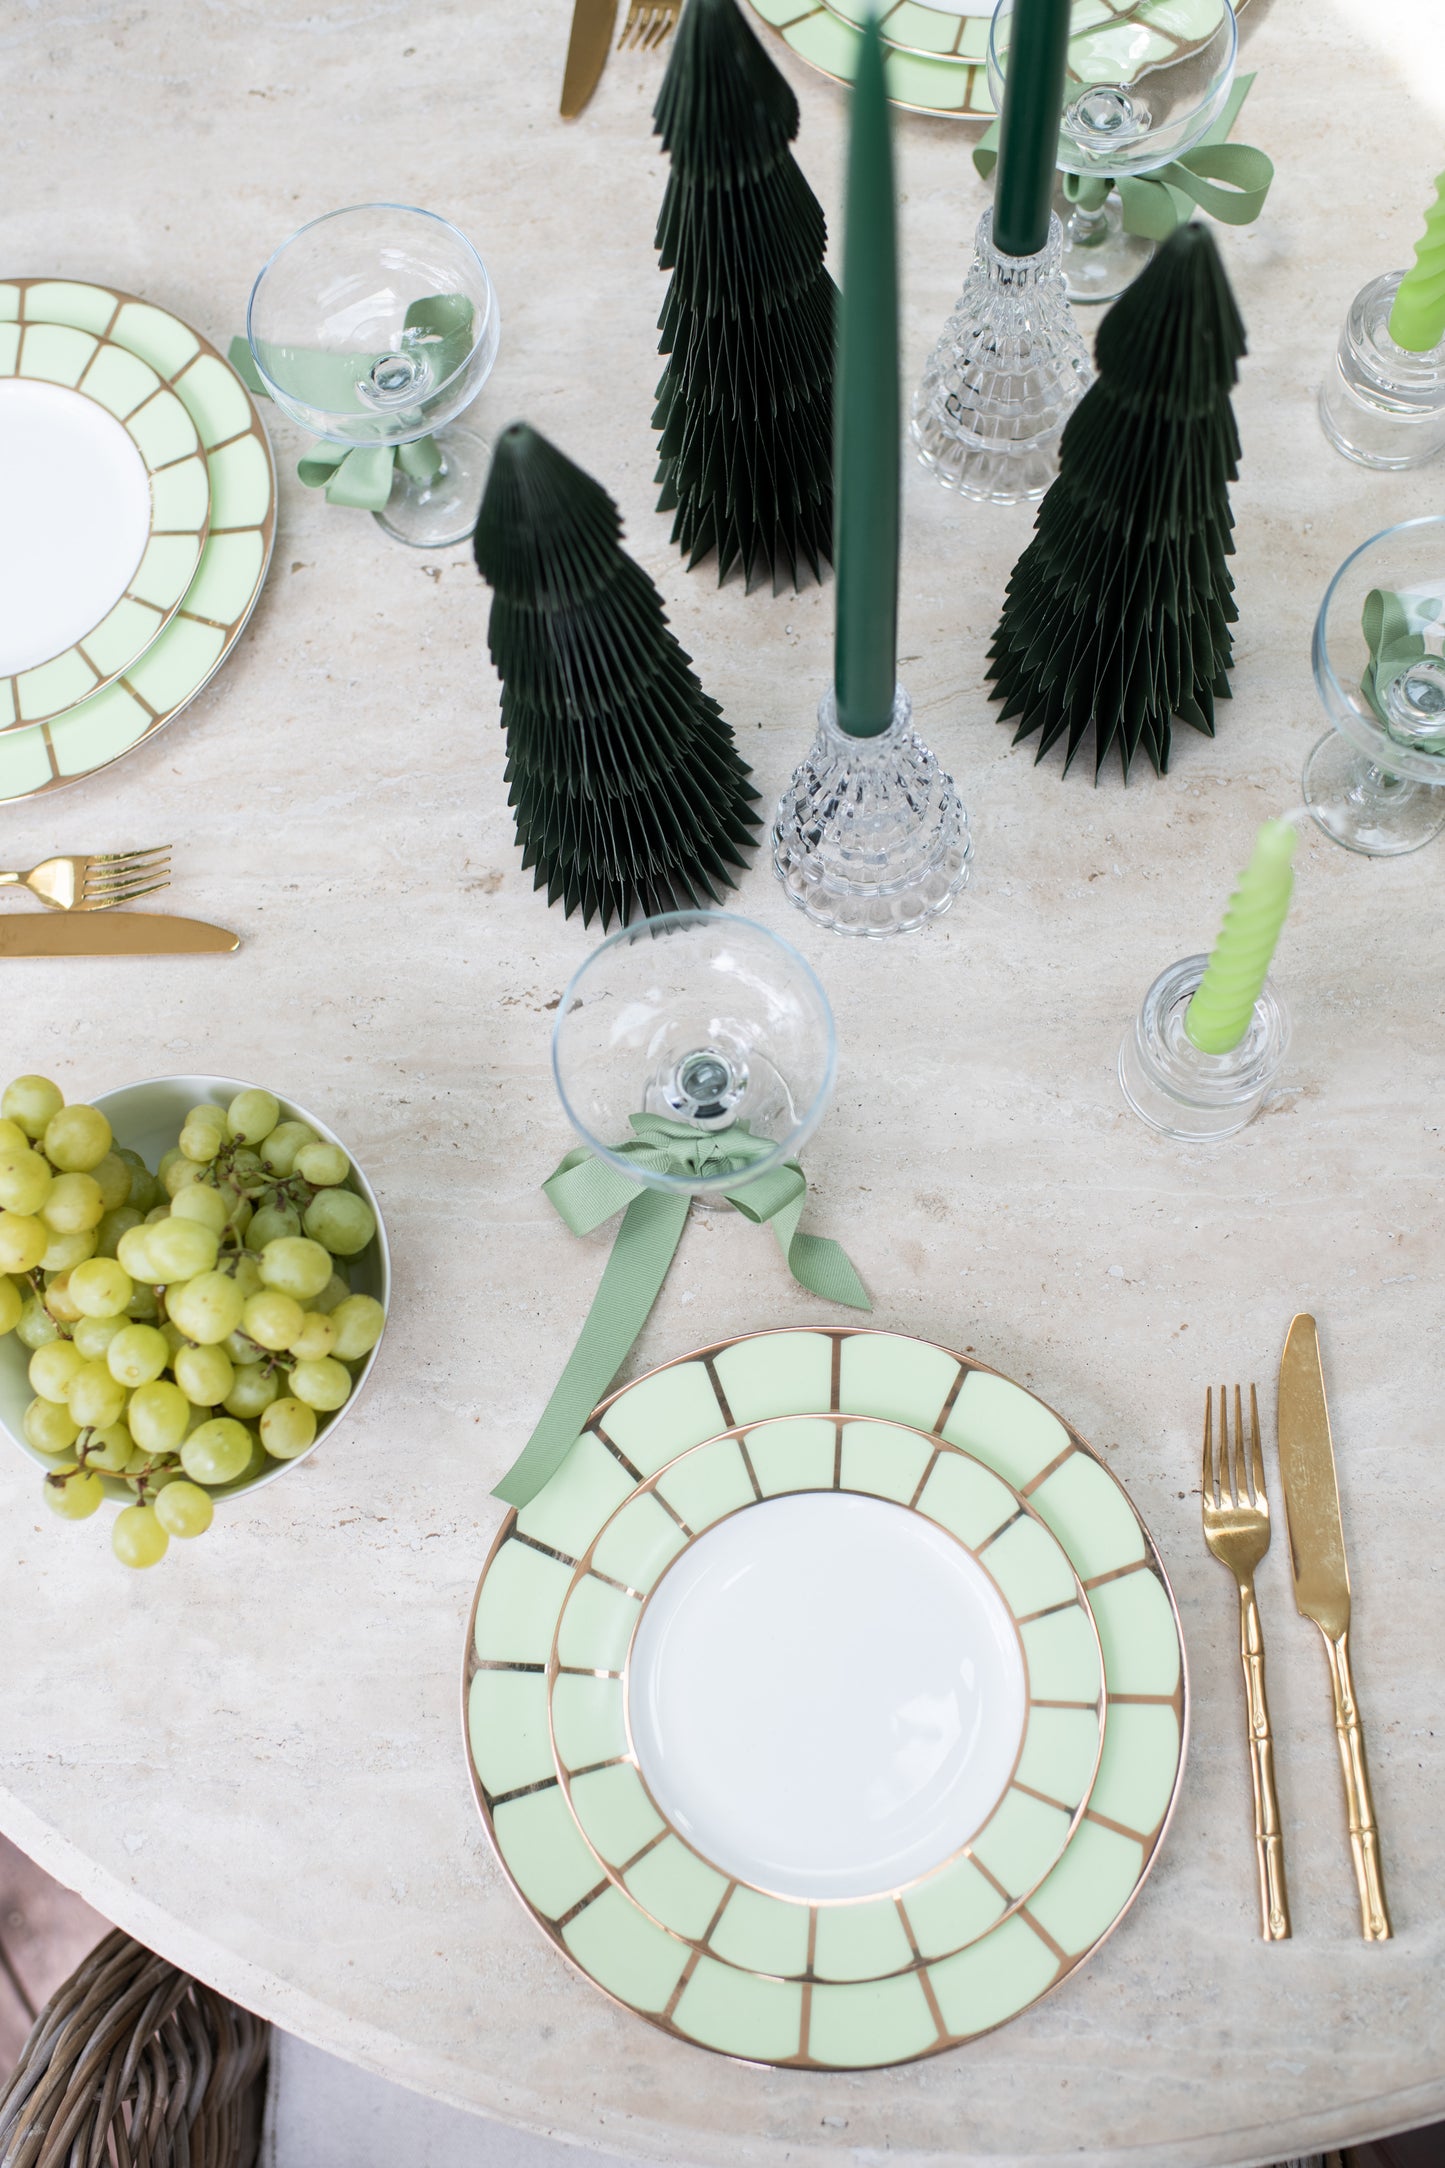 Sicily Dinner Set in Pistachio Green with Cutlery (Set of 6)